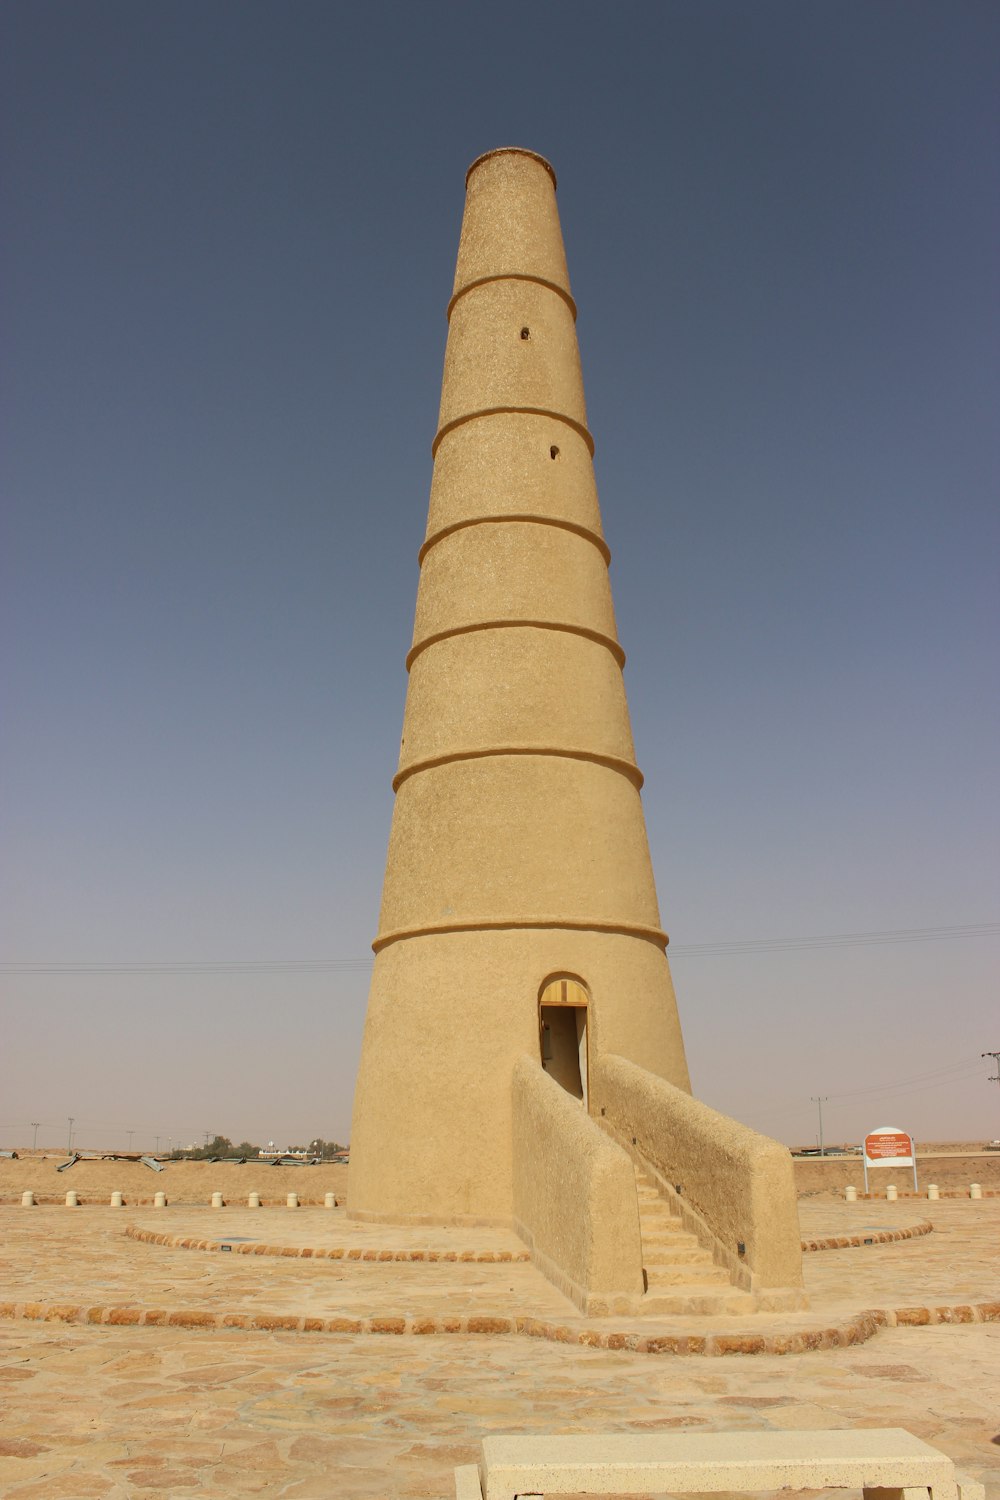 brown concrete tower under blue sky during daytime